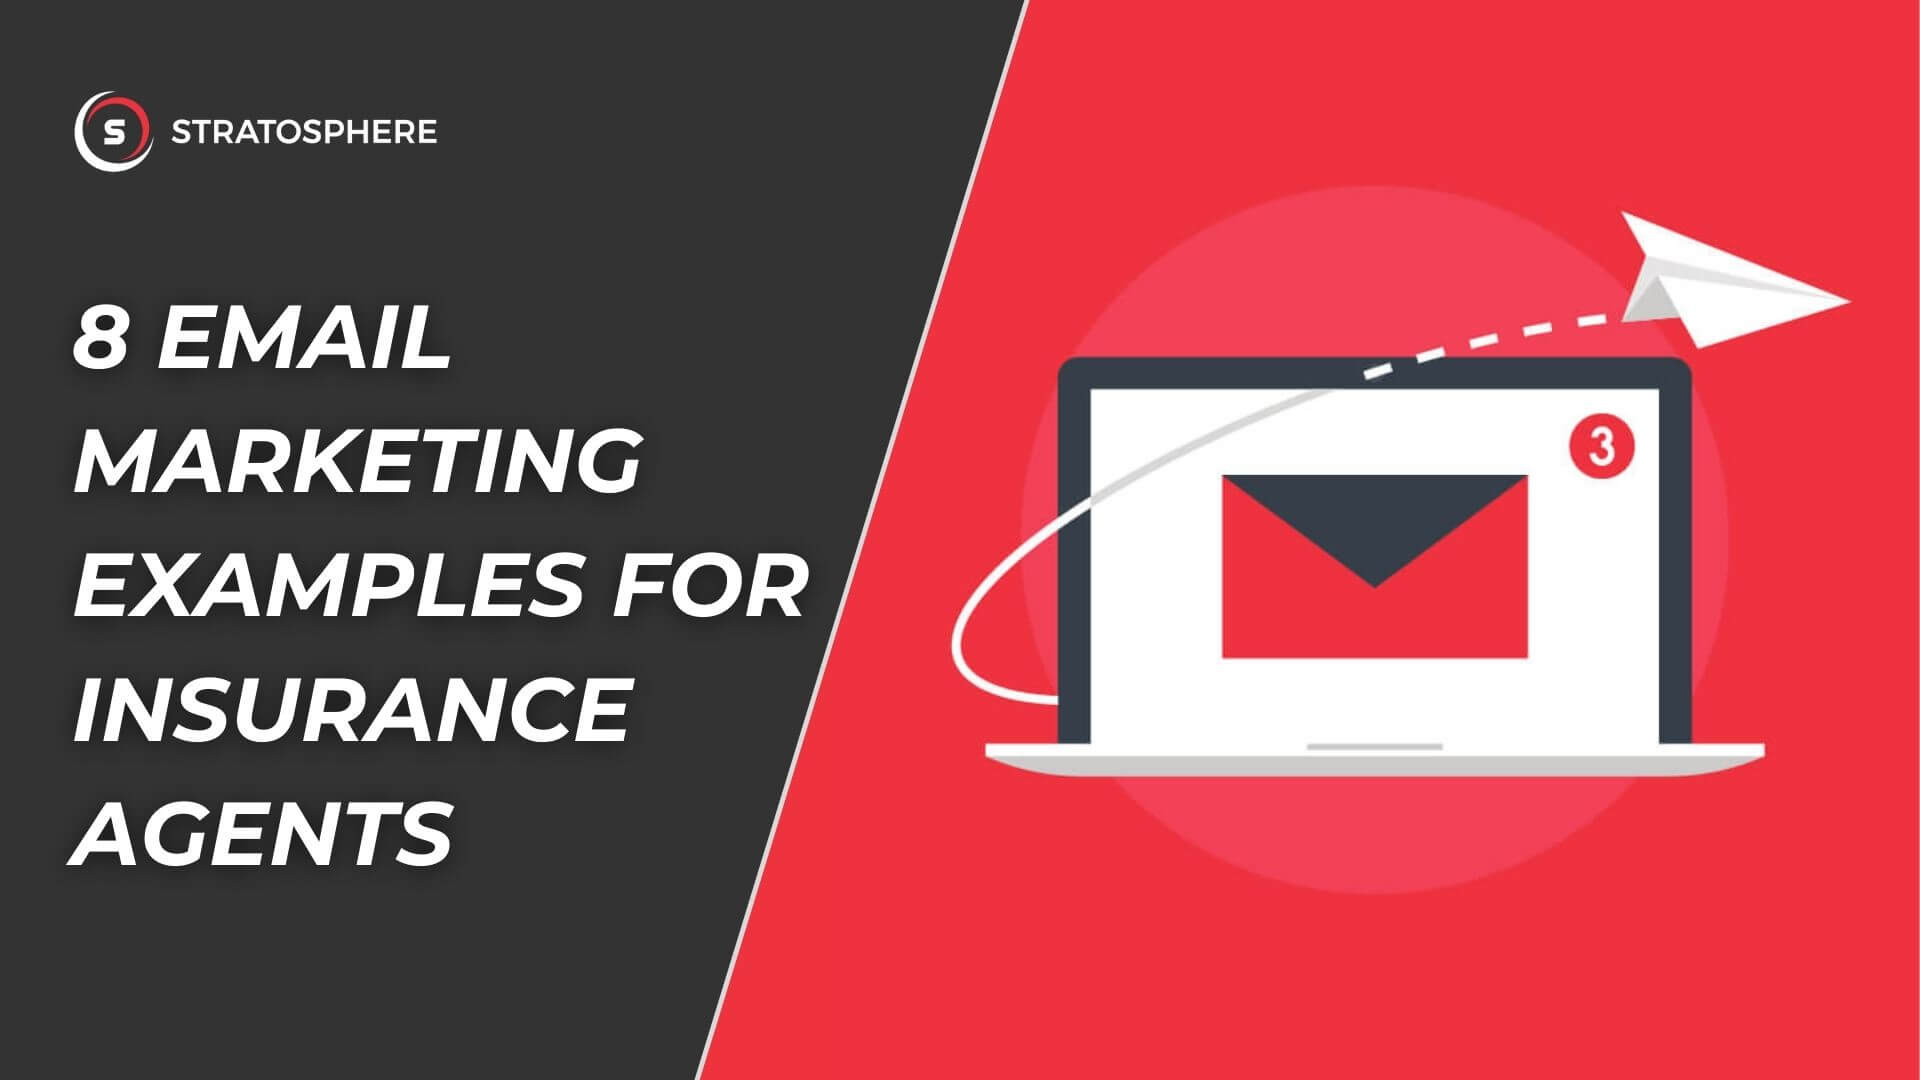 8 Email Marketing Examples for Insurance Agents